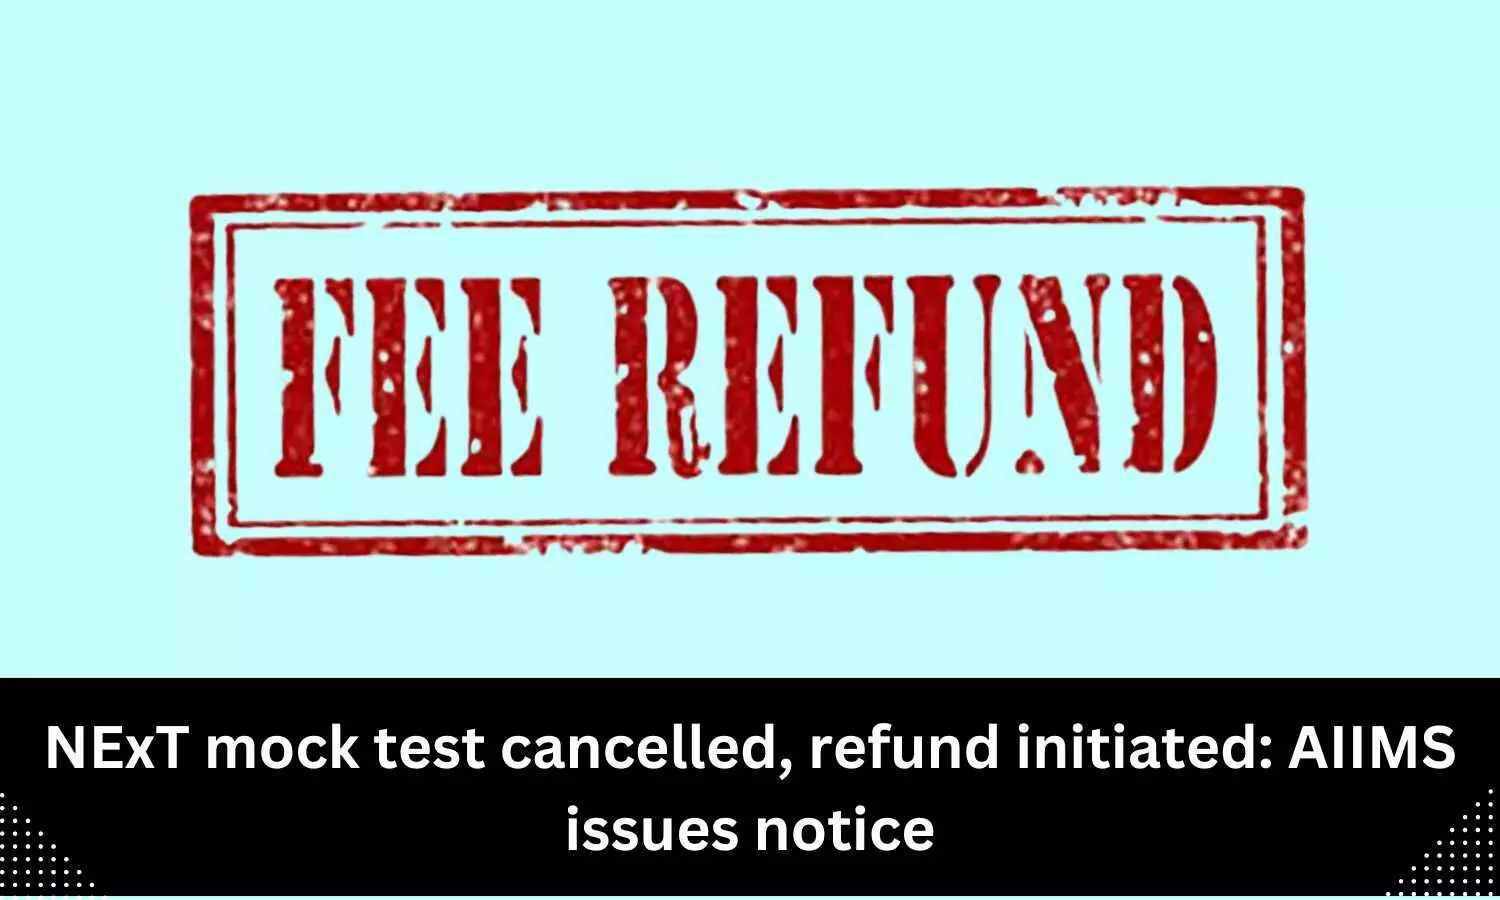 NExT mock test cancelled: AIIMS issues notice, Fees refund process initiated